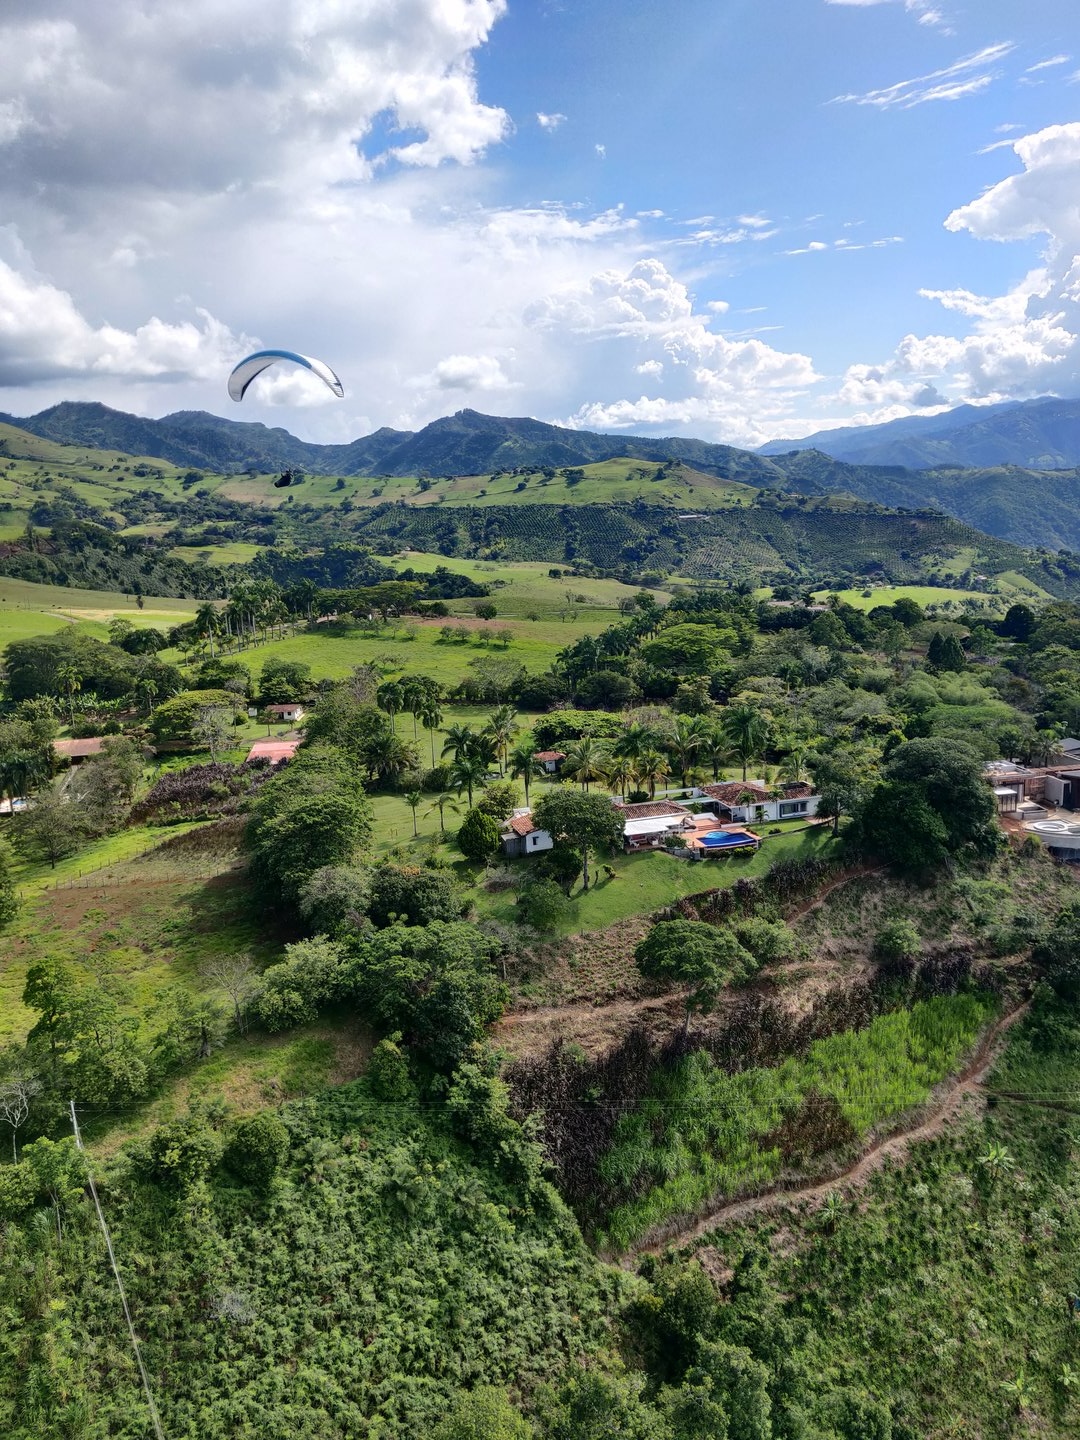 Paragliding above luxury homes